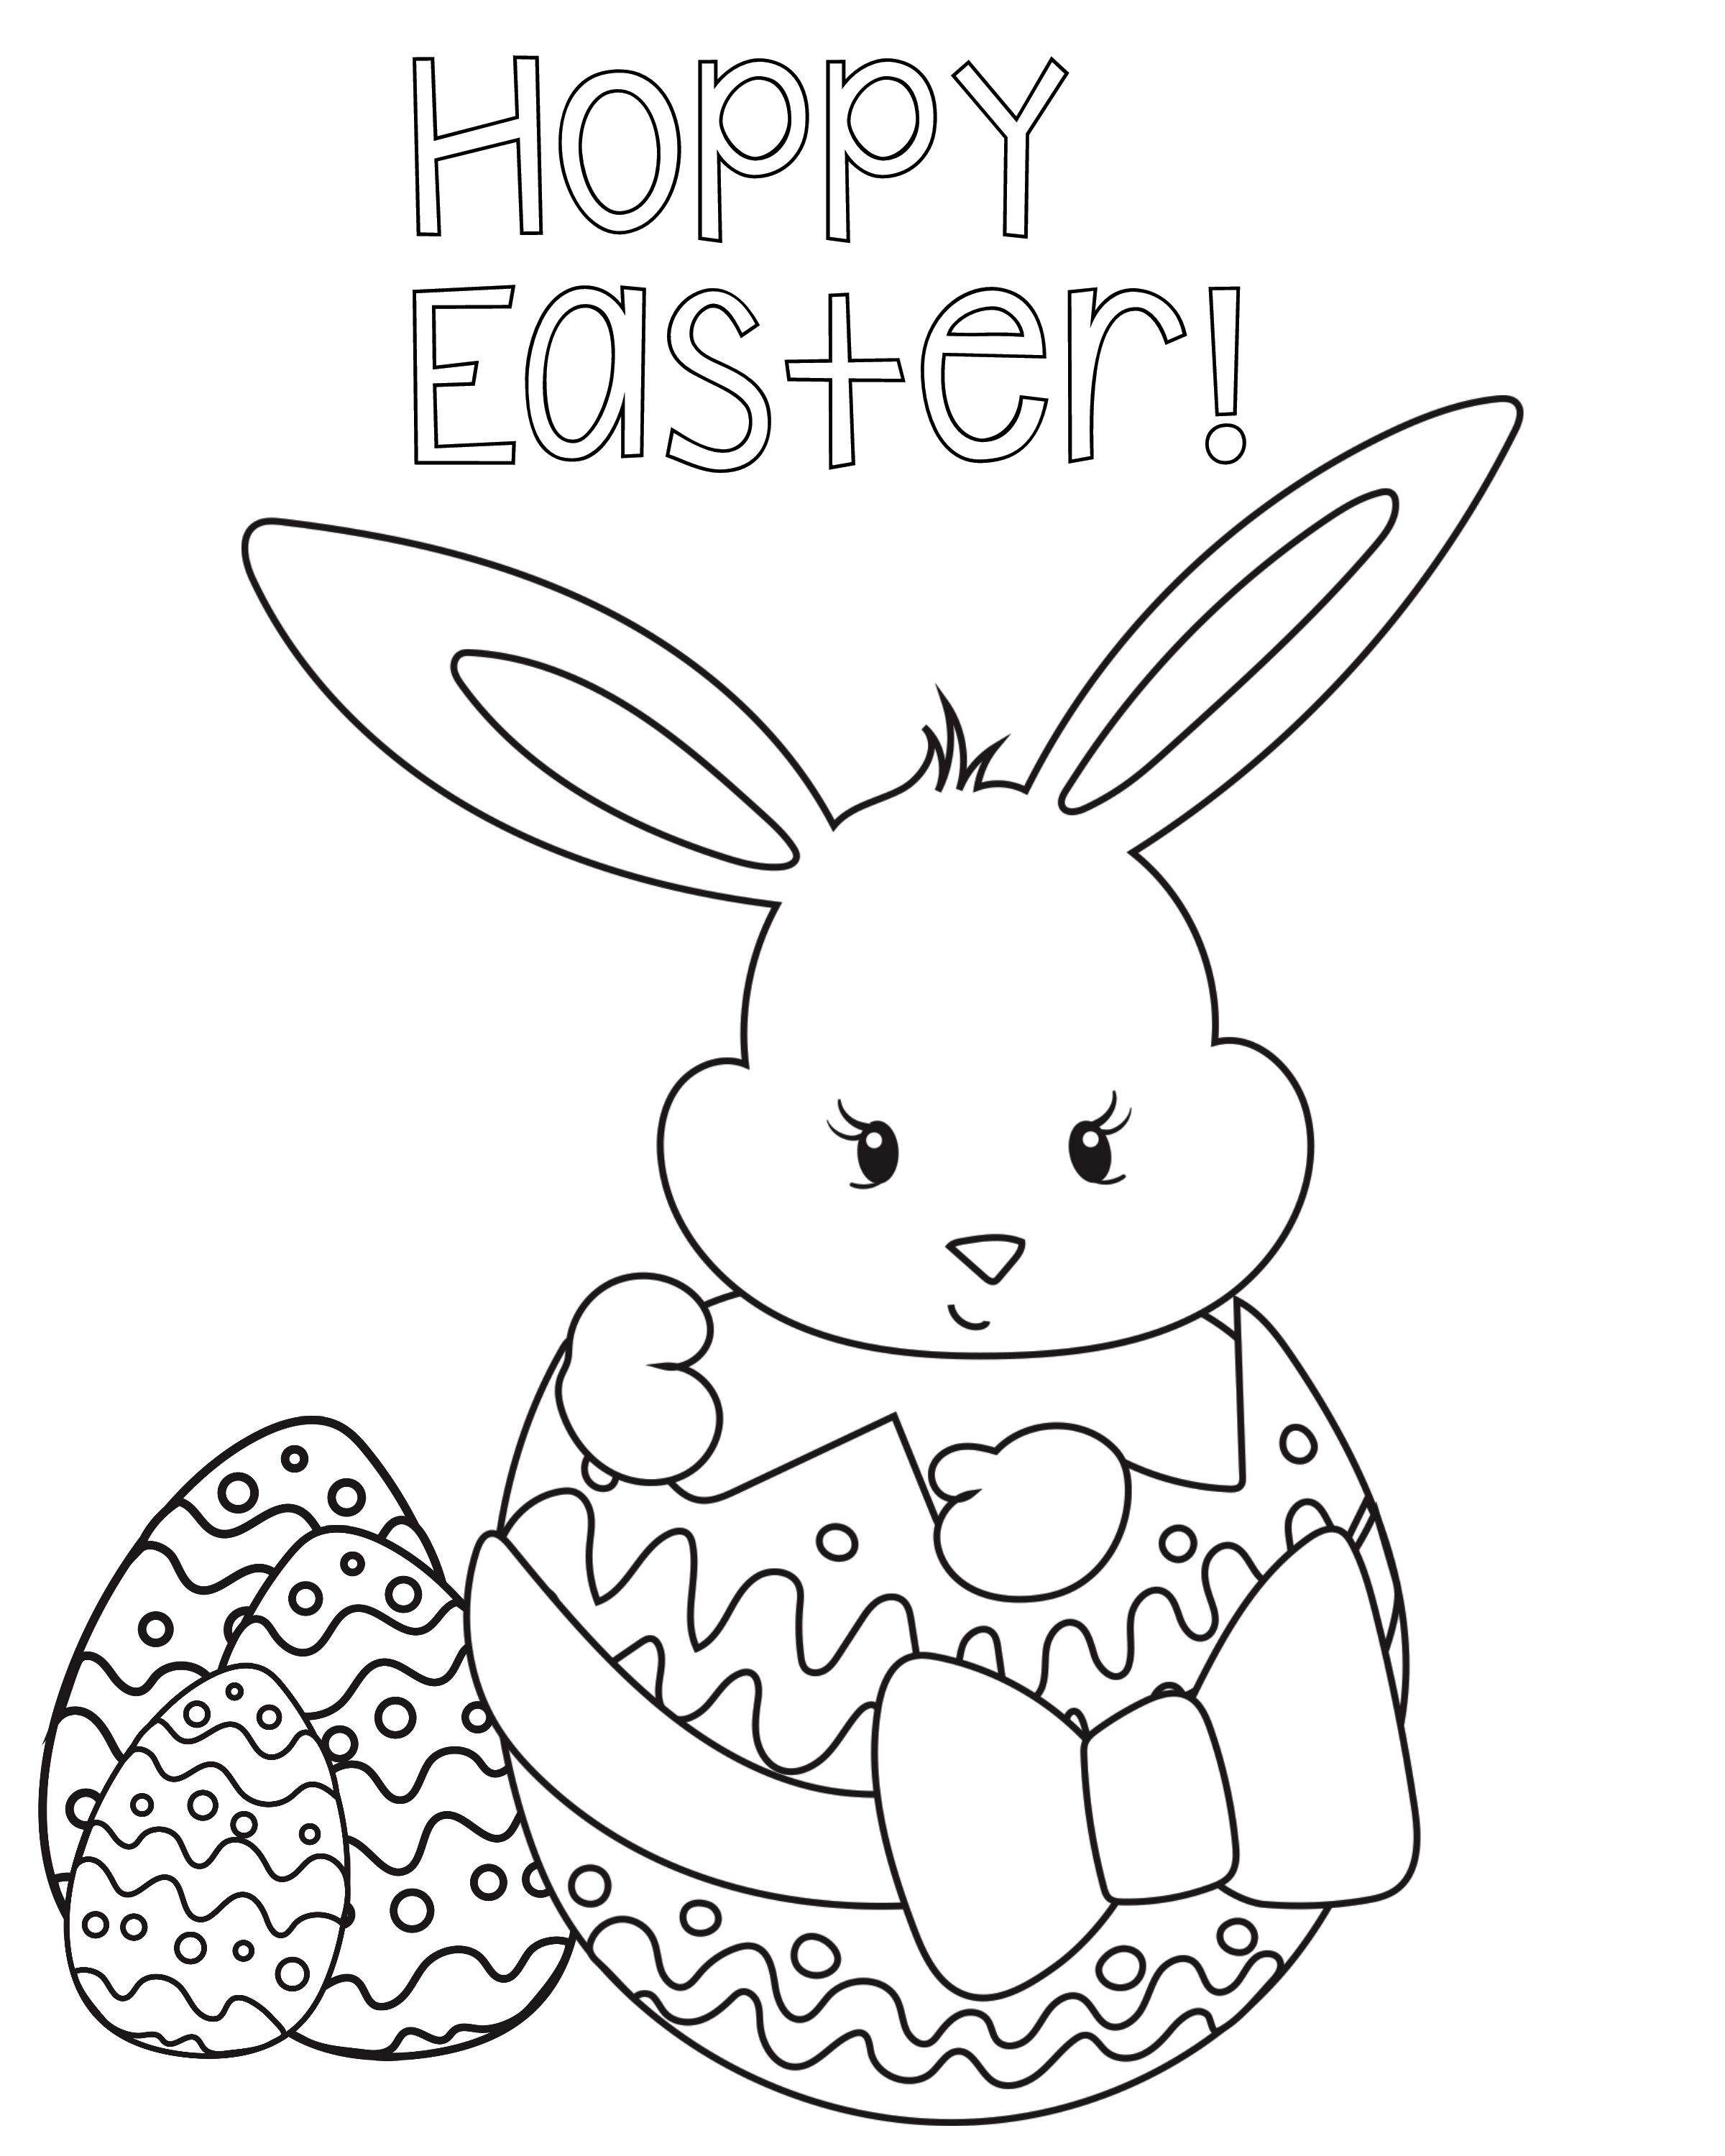 Free Printable Happy Easter Coloring Pages 1